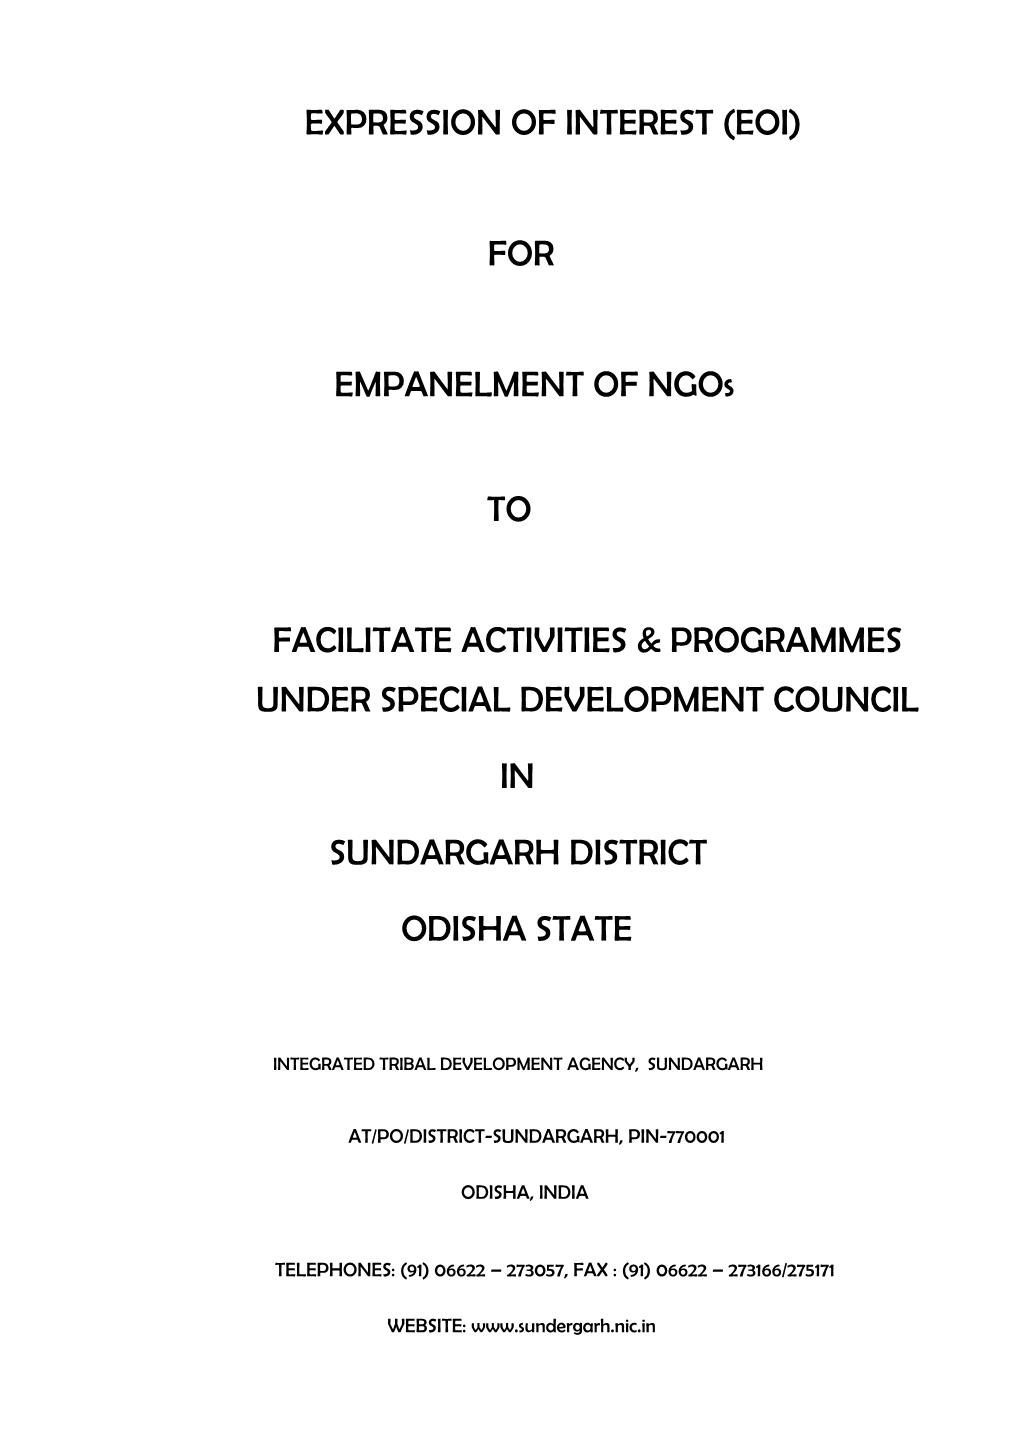 EXPRESSION of INTEREST (EOI) for EMPANELMENT of Ngos to FACILITATE ACTIVITIES & PROGRAMMES UNDER SPECIAL DEVELOPMENT COUNCI